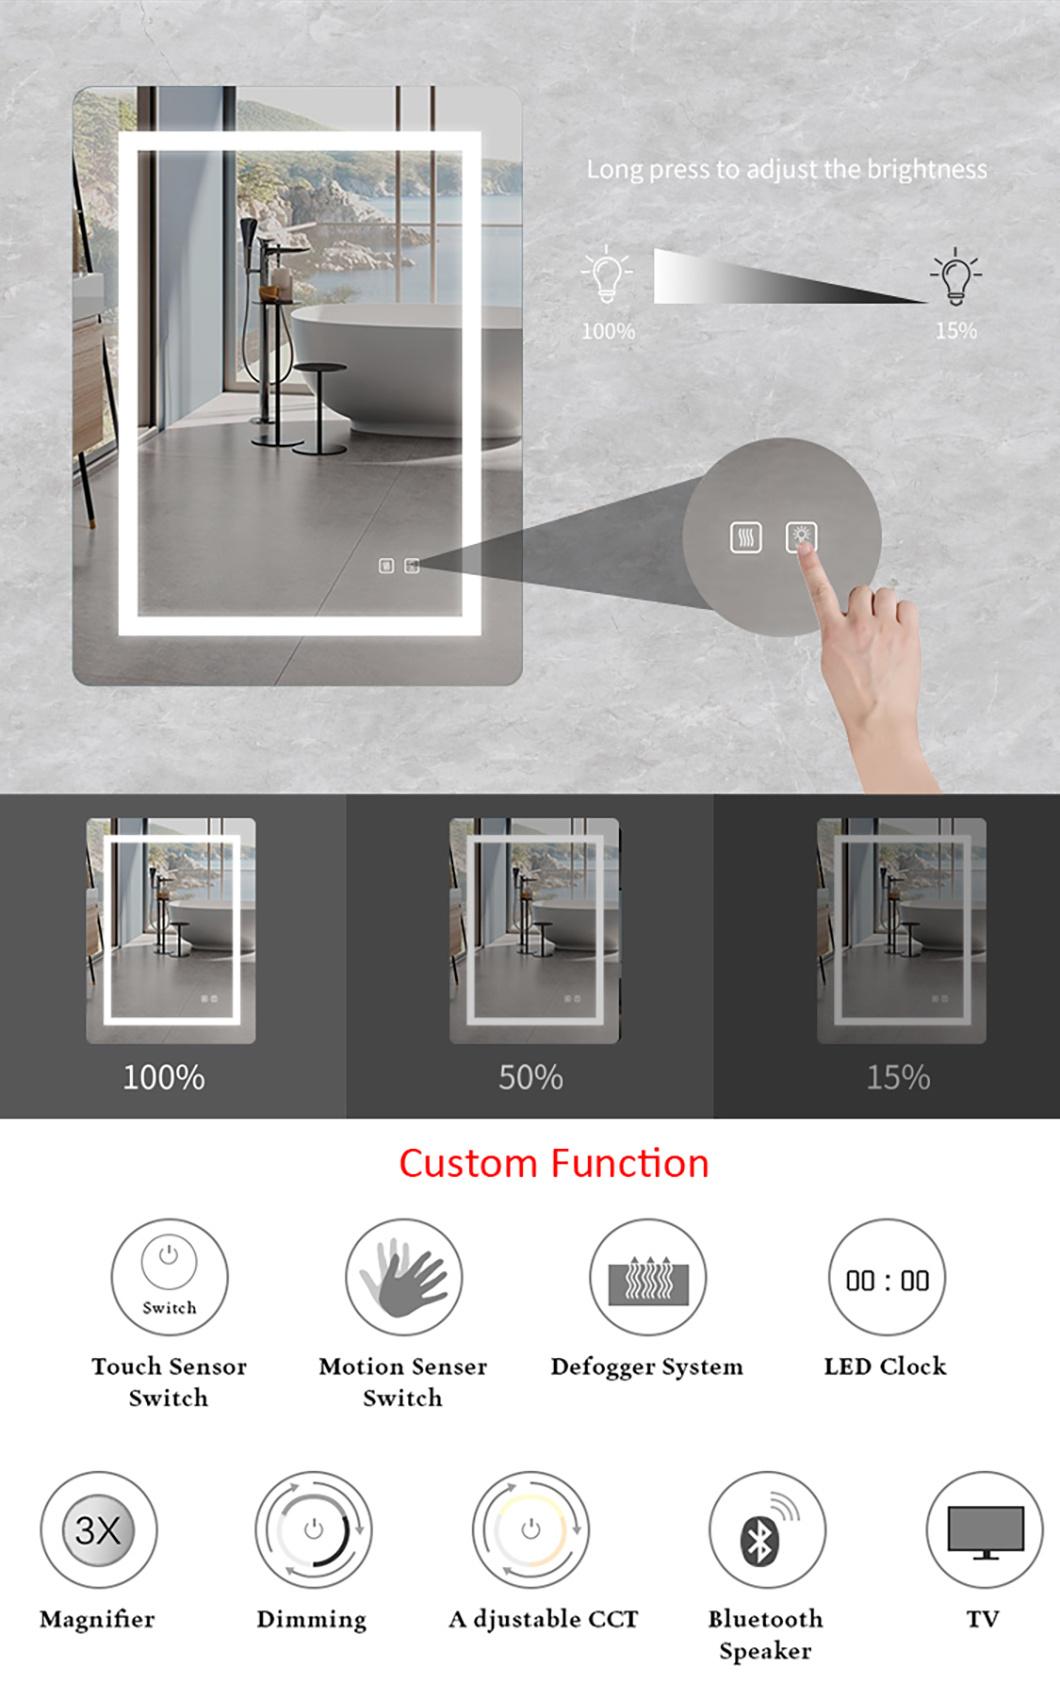 LED Bathroom Mirror Magnify Wall Mounted Lighted Hotel Mirror